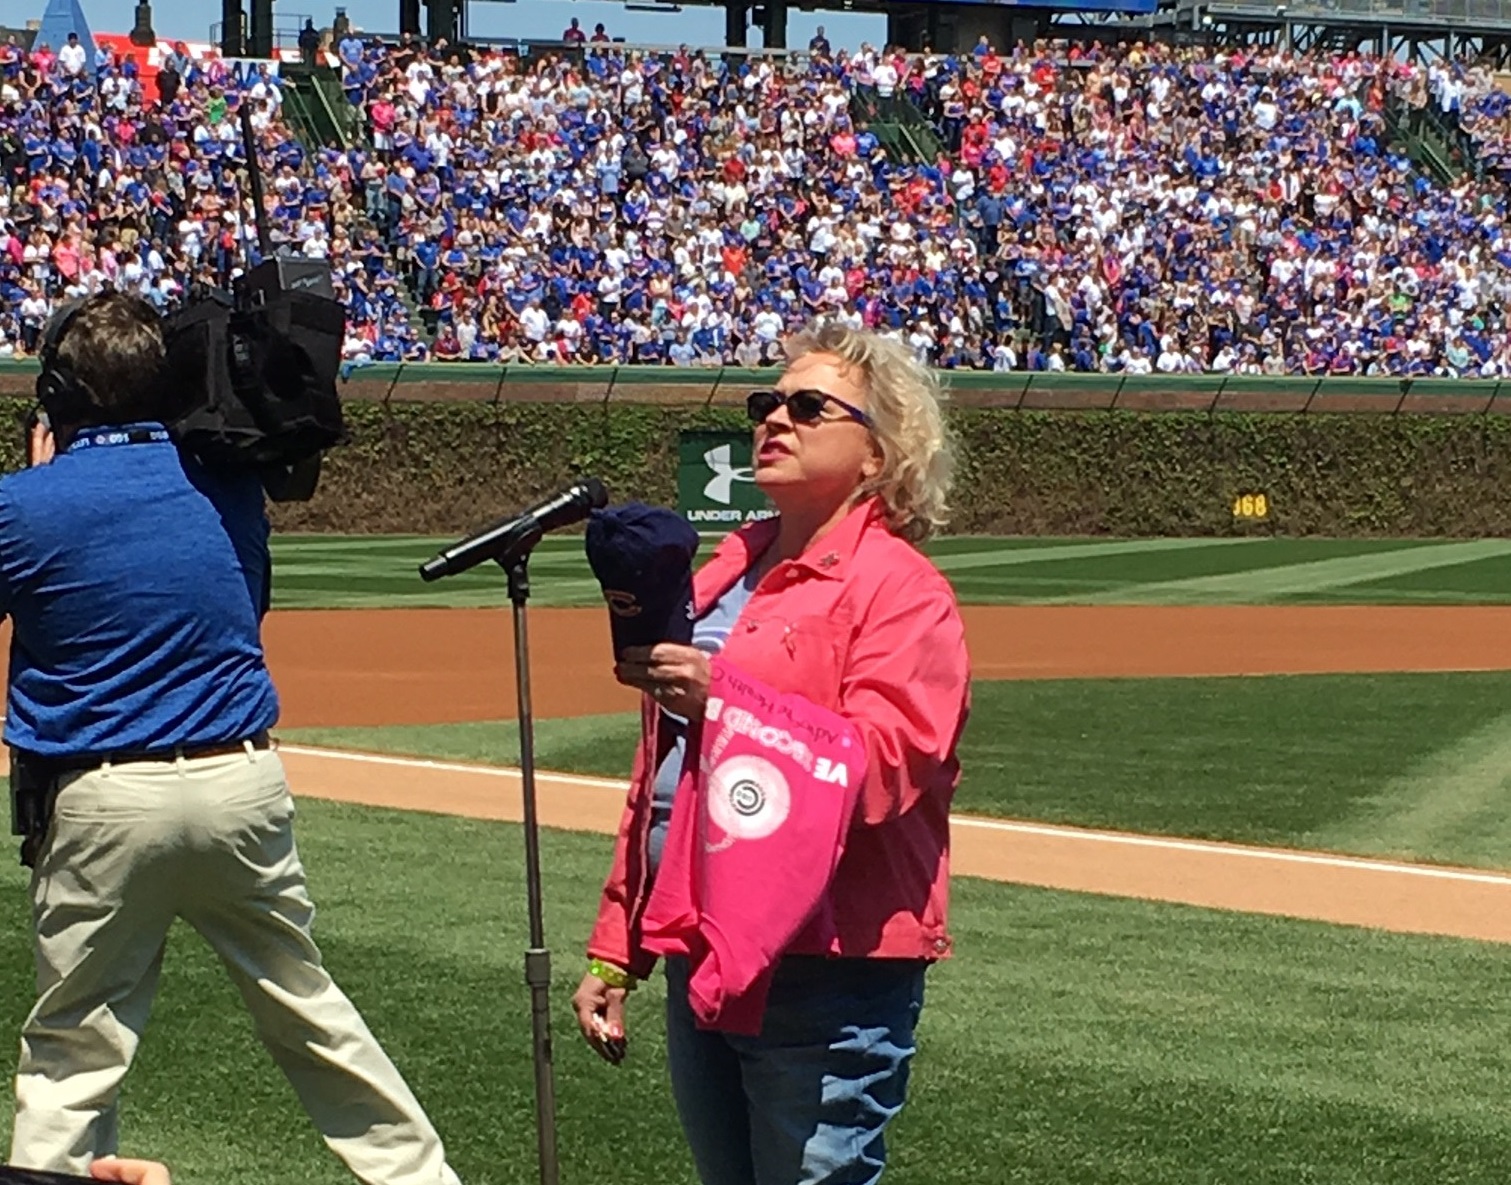 Cubs to host Annual Pink Out game in honor of Breast Cancer